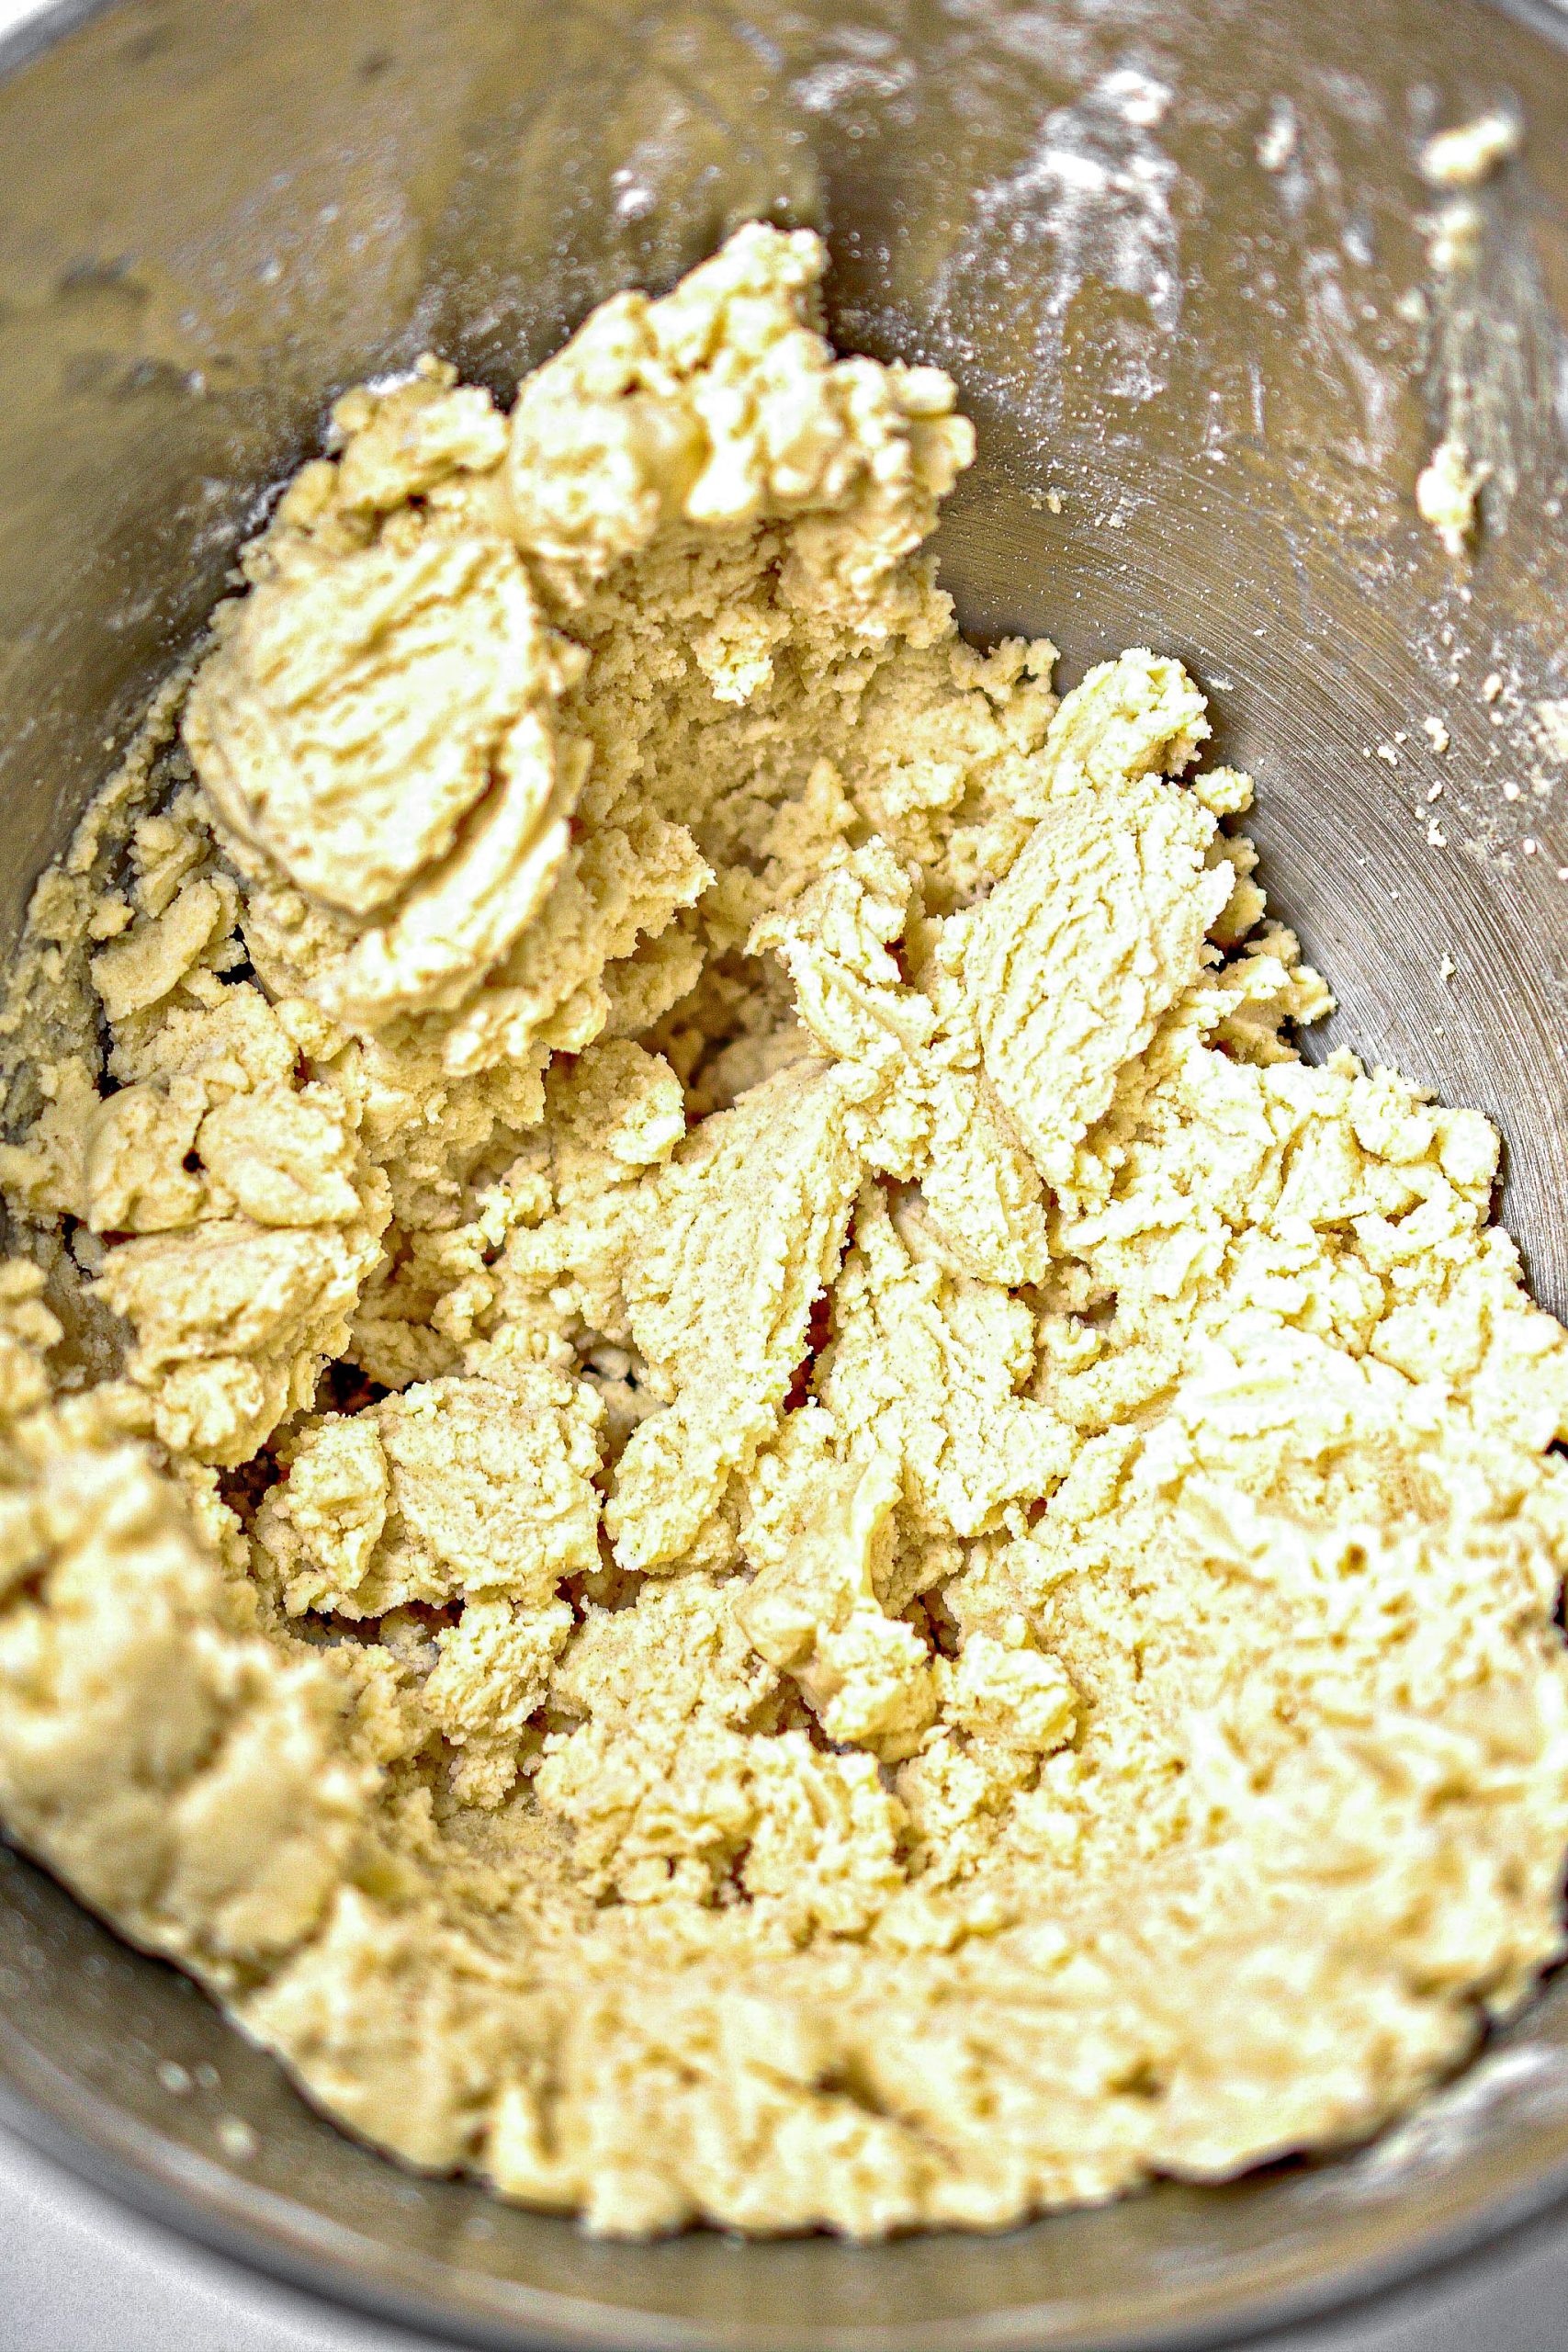 Add the flour mixture into the mixing bowl, and blend until a thick dough forms.